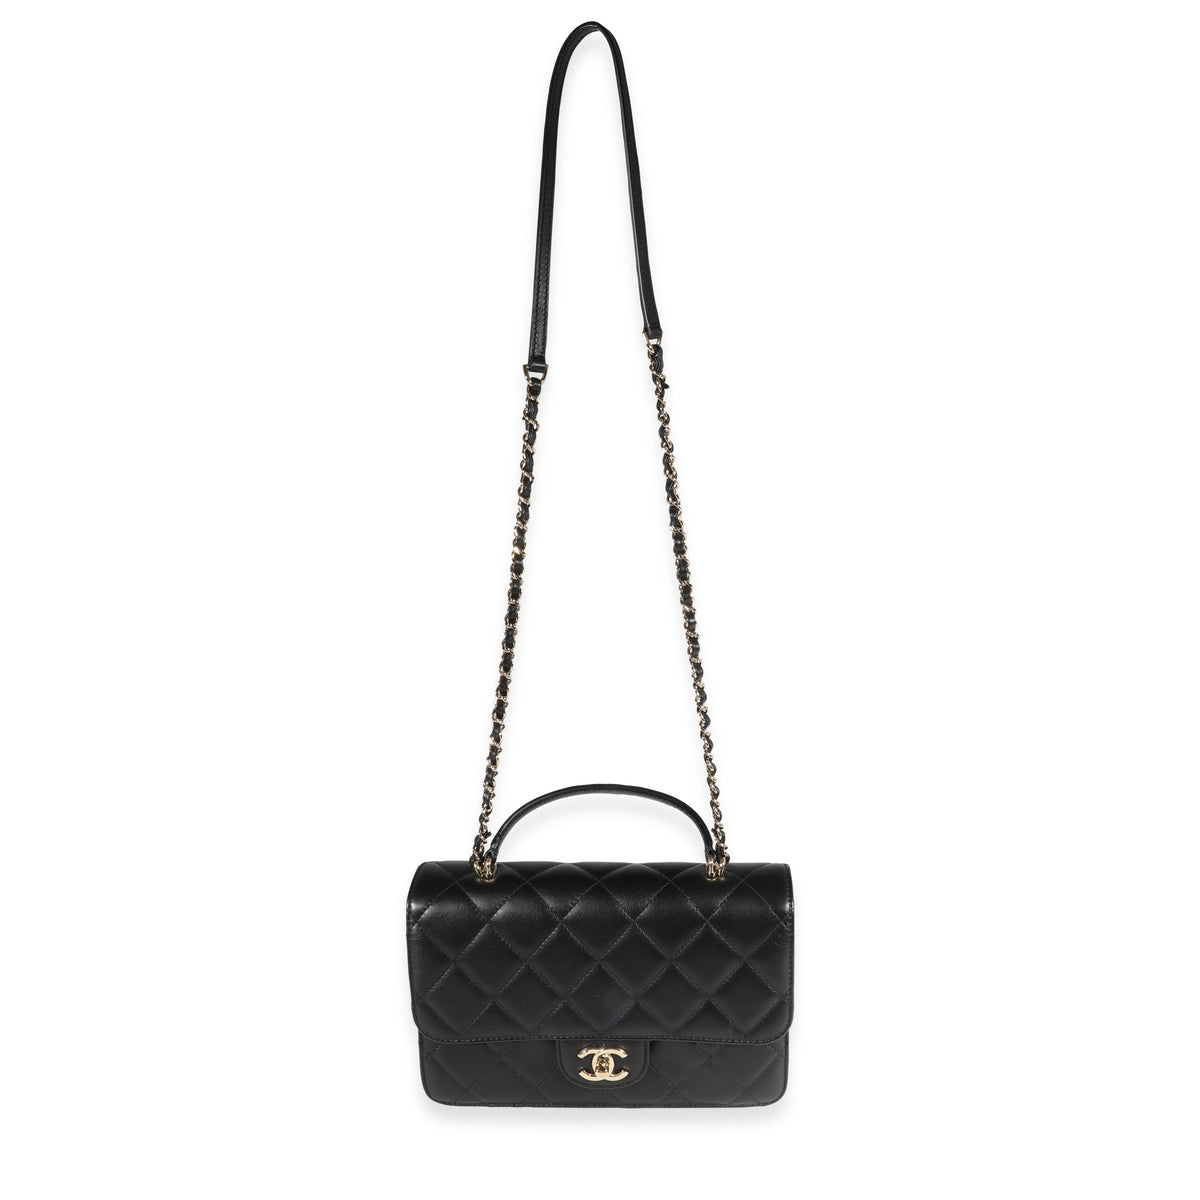 Chanel Black Quilted Lambskin Coco Lady Top Handle Flap Bag, myGemma